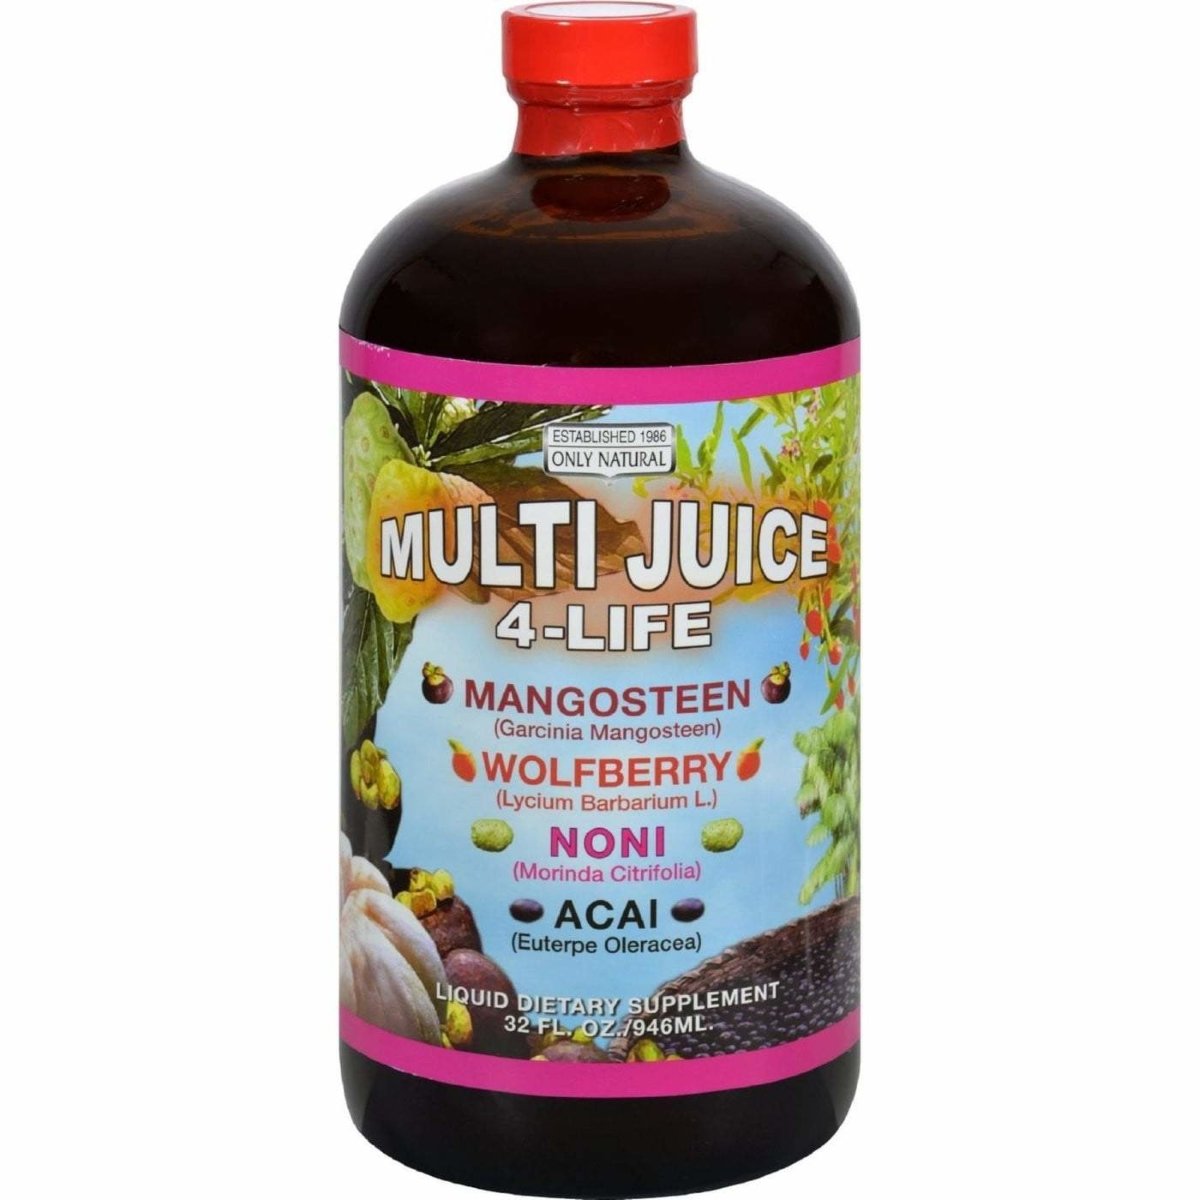 Only Natural Multi Juice 4 Life, 32-Ounce Glass Bottle